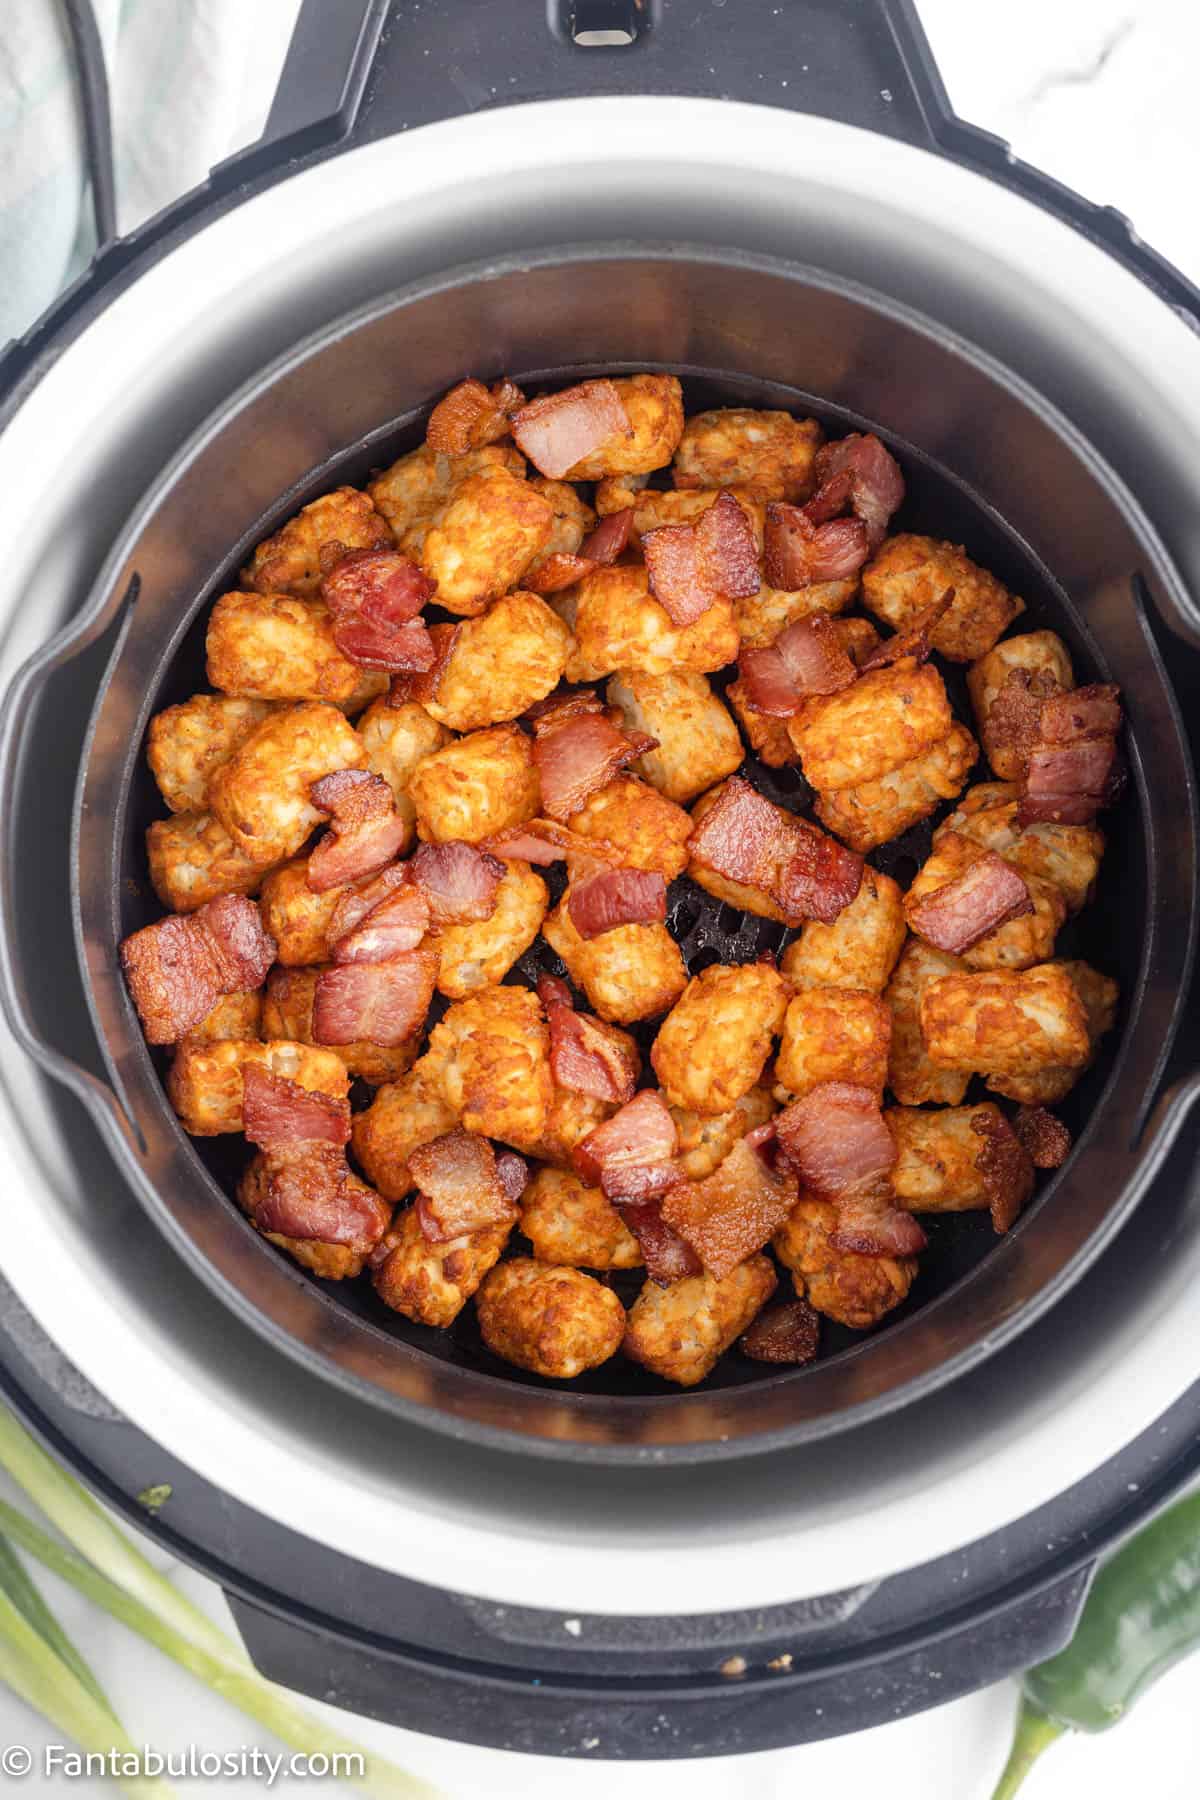 Bacon and Tater Tots